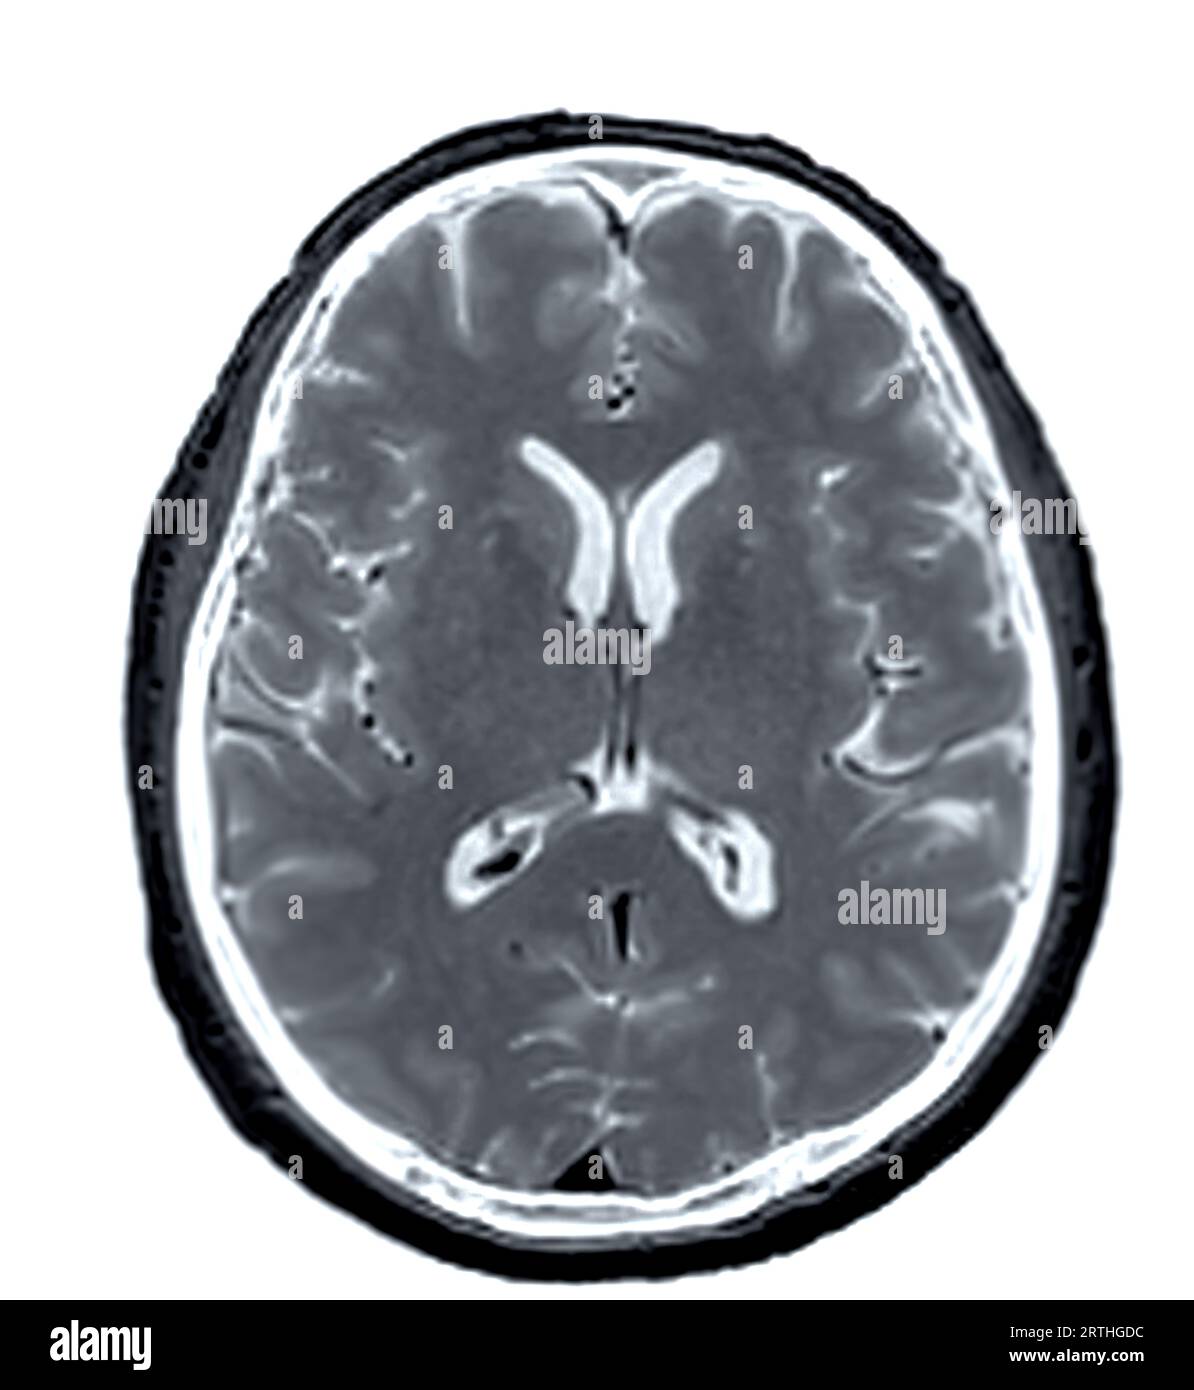 MRI  brain scan  axial view for detect  Brain  diseases sush as stroke disease, Brain tumors and Infections. Stock Photo